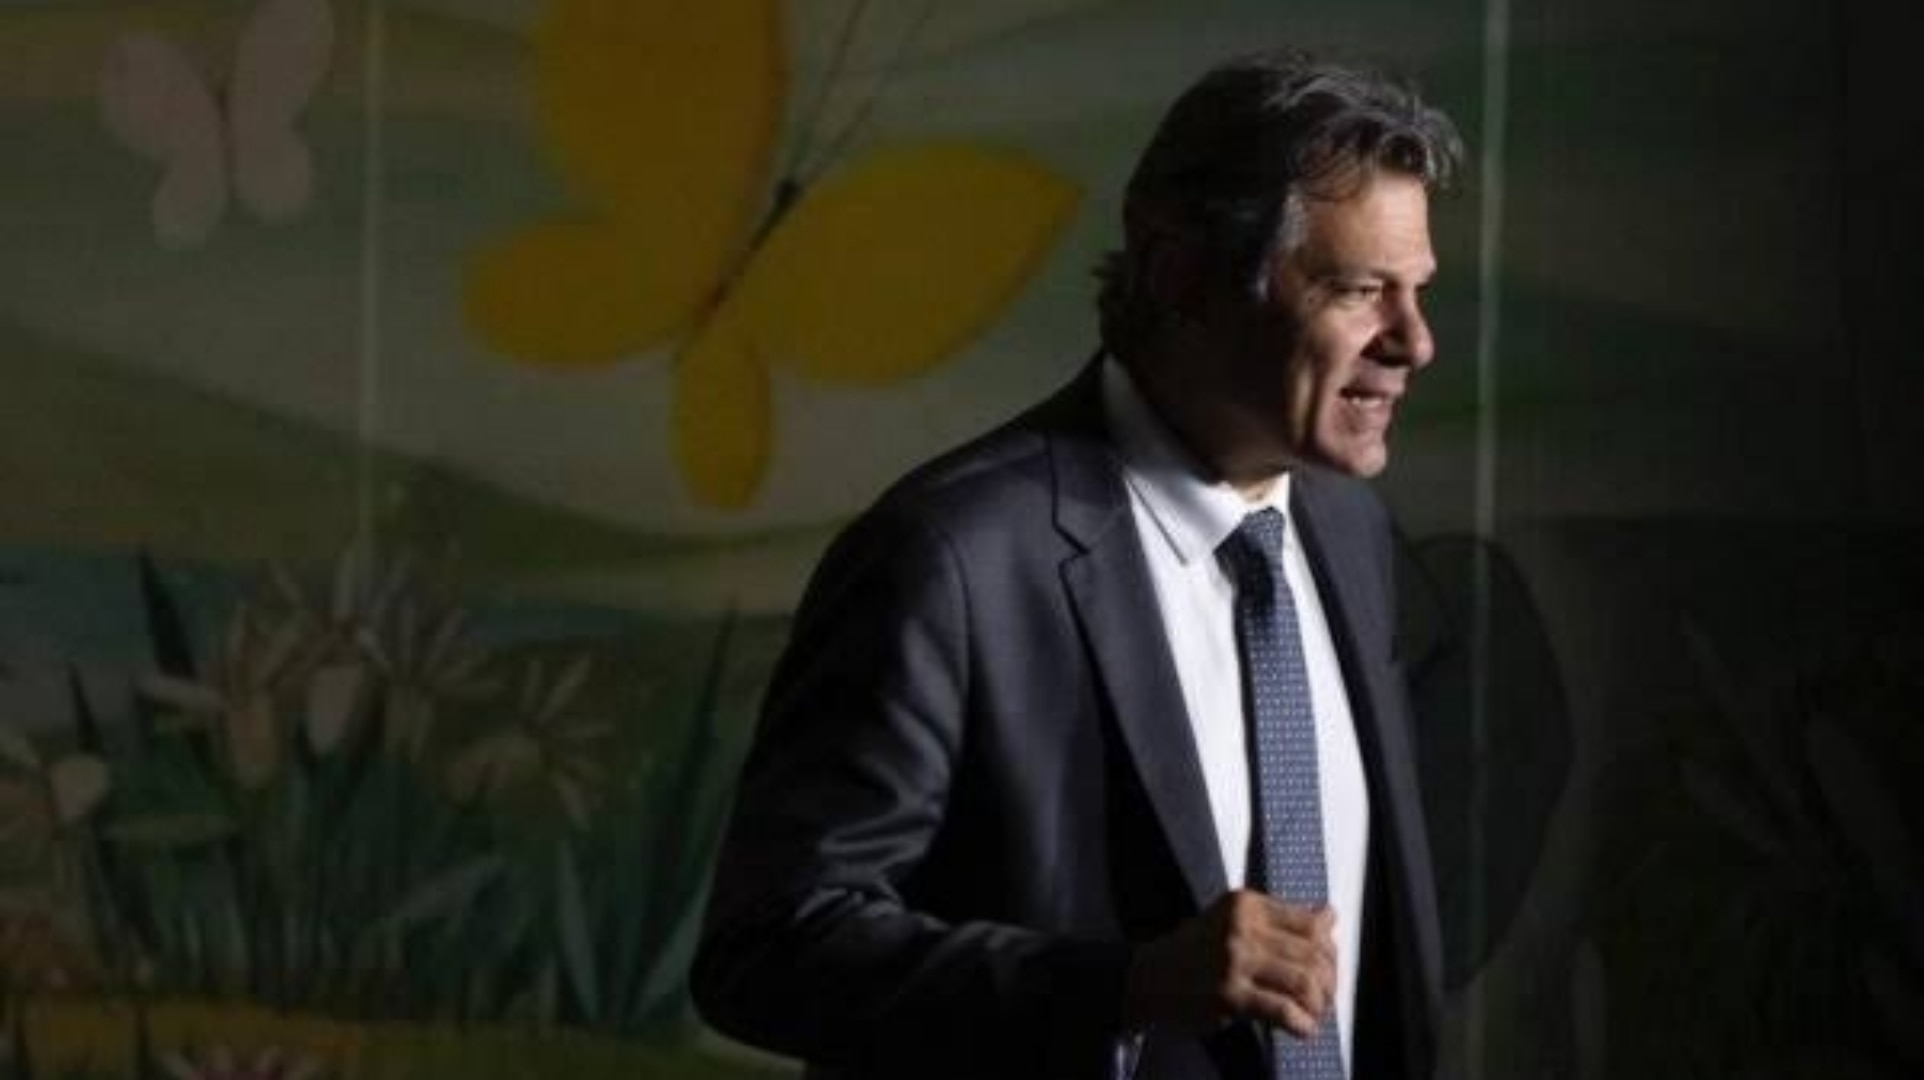 Leftist President-elect Lula da Silva picked a trusted ally, former Sao Paulo Mayor Fernando Haddad, as his Finance Minister, ending days of speculation over a key appointment.  For investors hoping Lula would farm out economic policy to more orthodox, market-friendly experts, the confirmation of Haddad's role was a disappointment.  Brazil's real weakened over 1% against the dollar after Haddad's name was announced.  Markets fear that his administration could be marked by an expansion of public spending and an increase in the national debt.